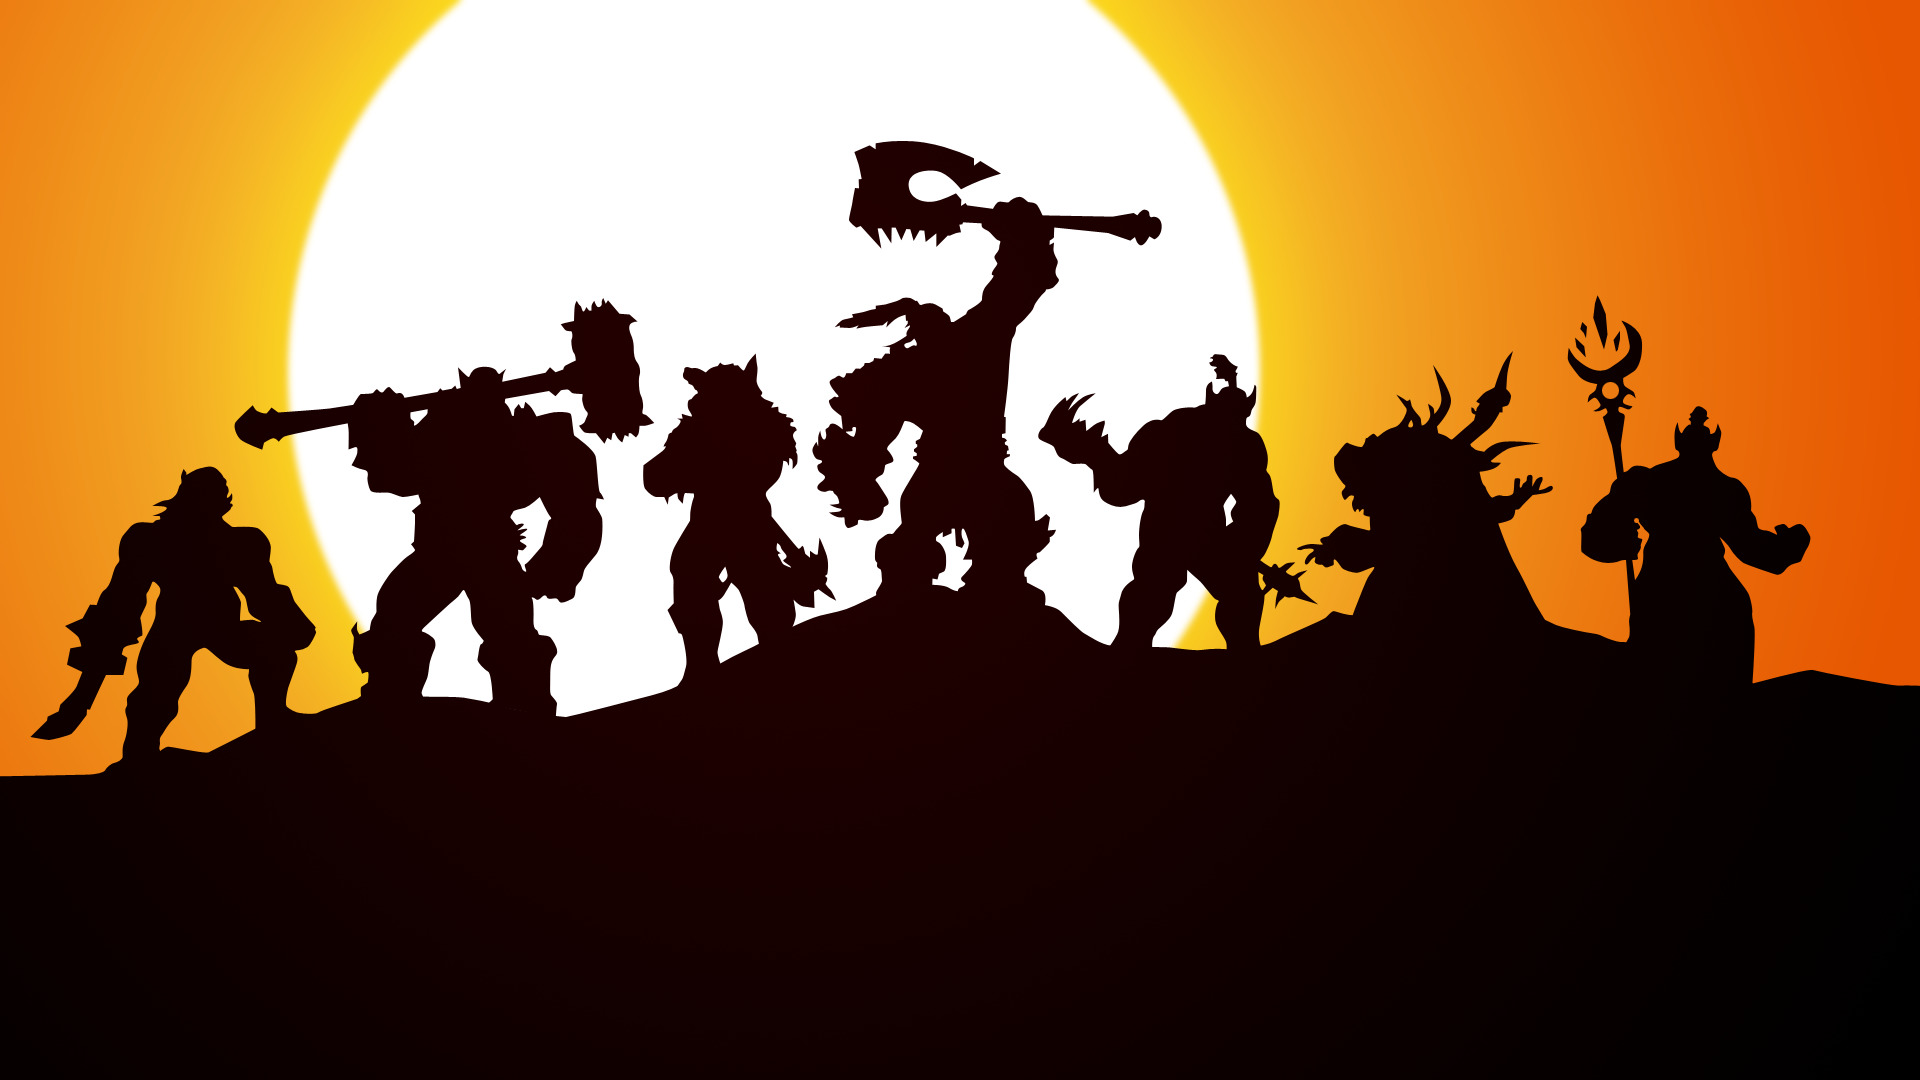 World of Warcraft, Warlords of Draenor, World of Warcraft: Warlords of Draenor Wallpaper